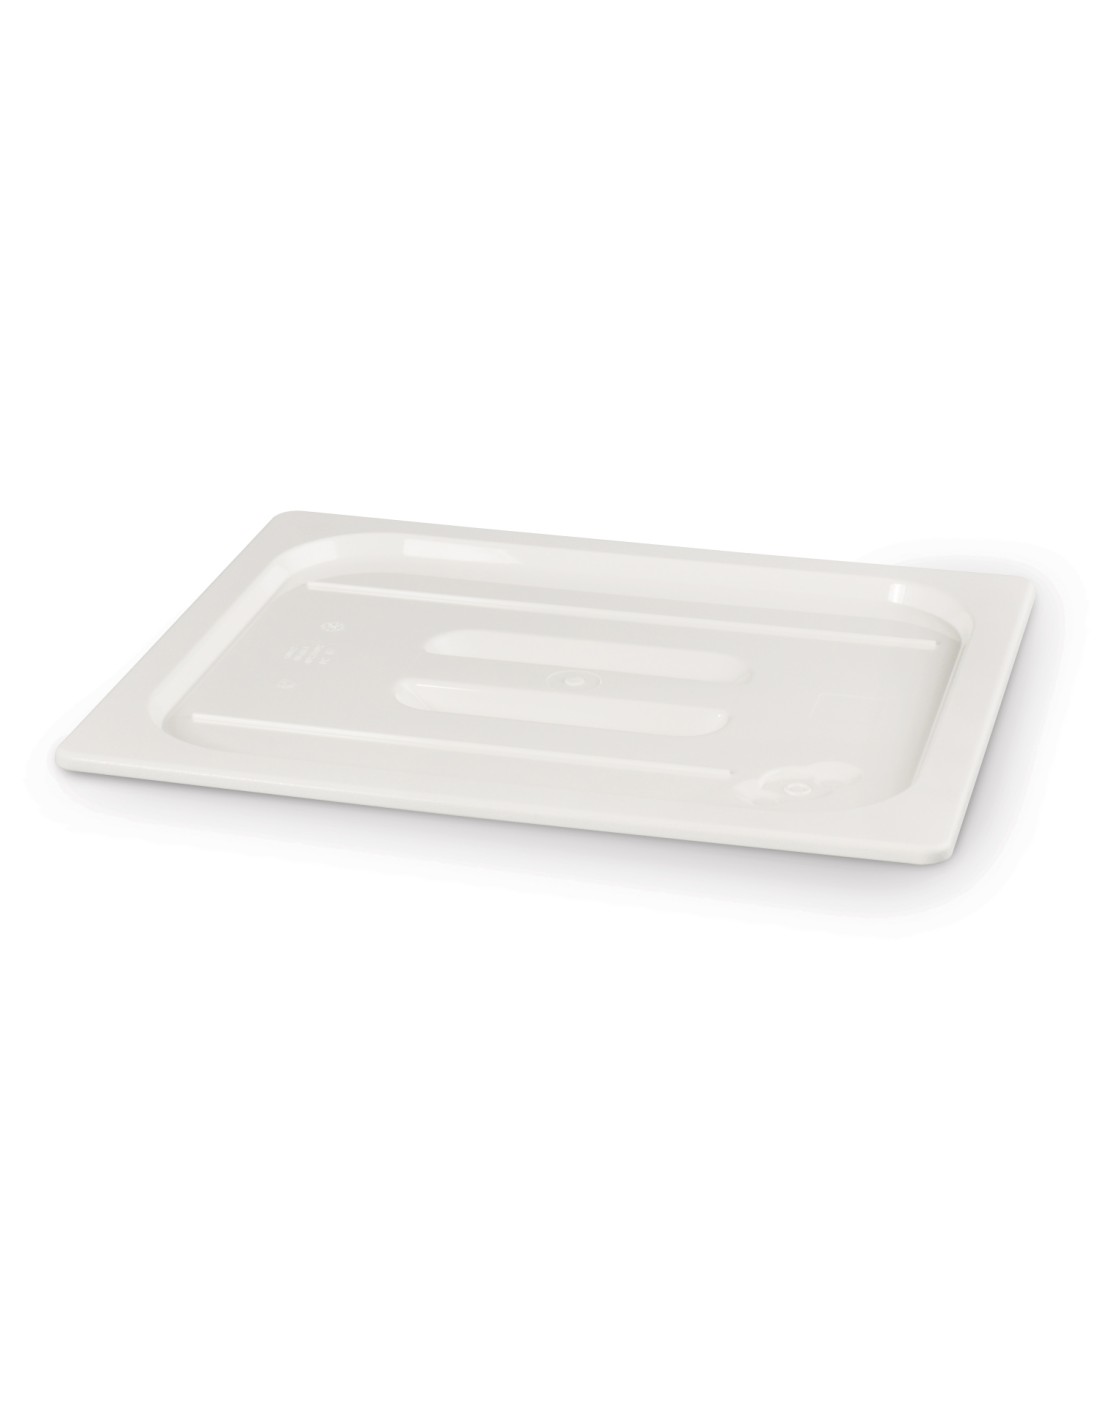 Lid for GN 1/1 trays - In white polycarbonate - mm 530 x 325